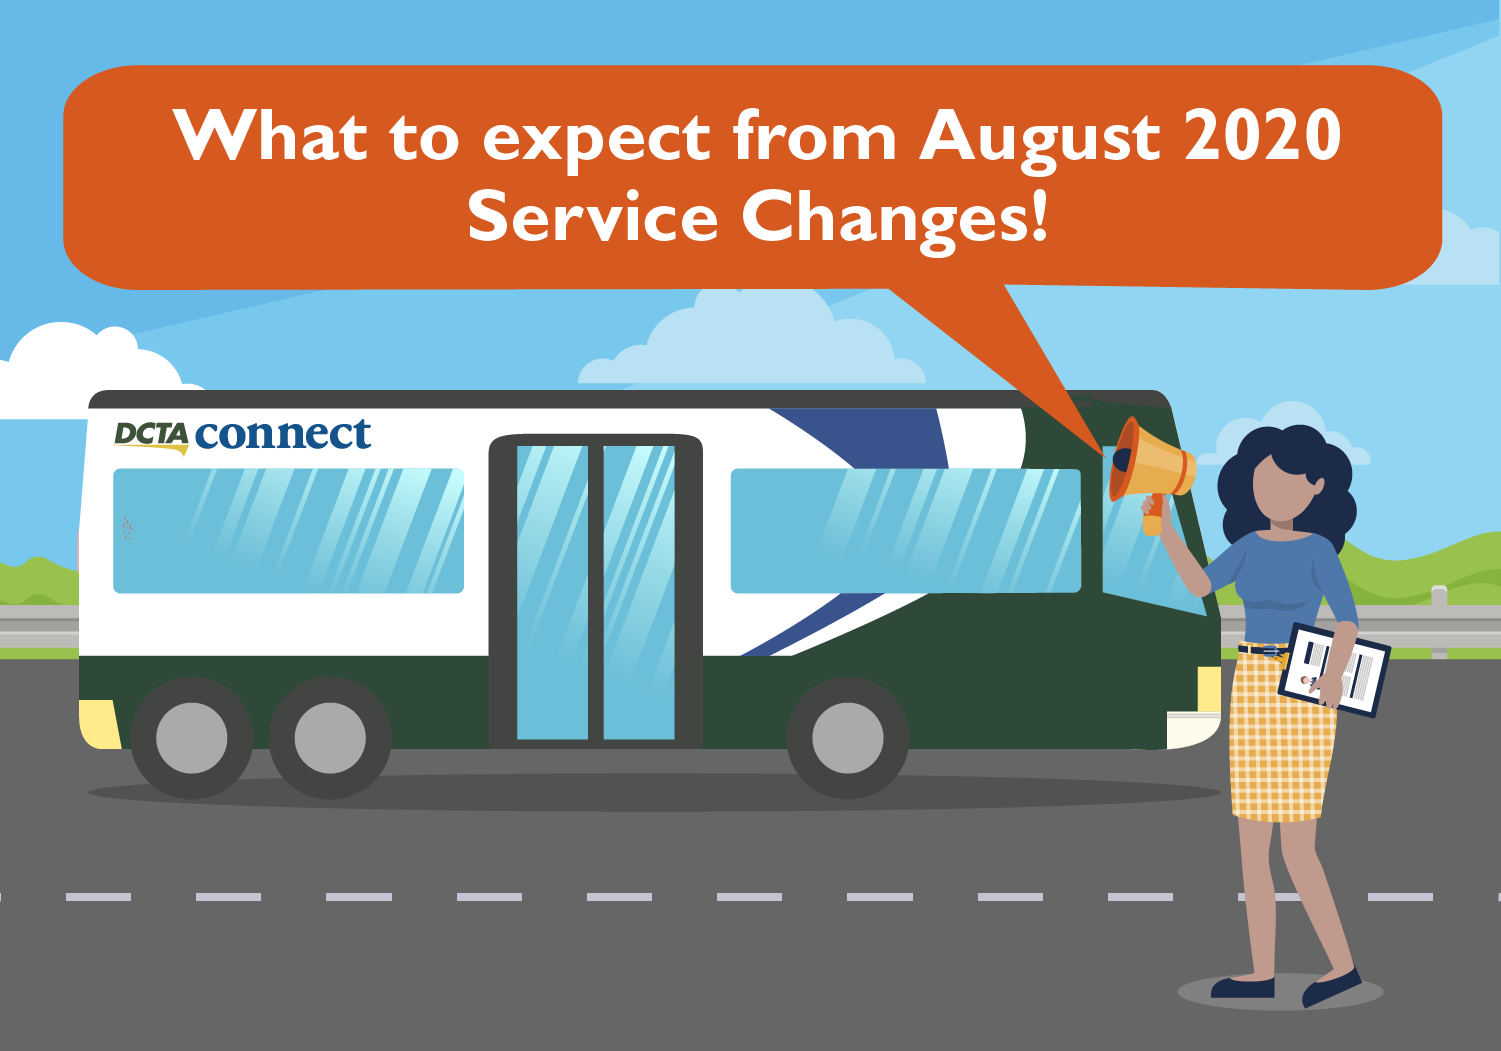 The Five W’s of the Upcoming August 2020 Service Changes